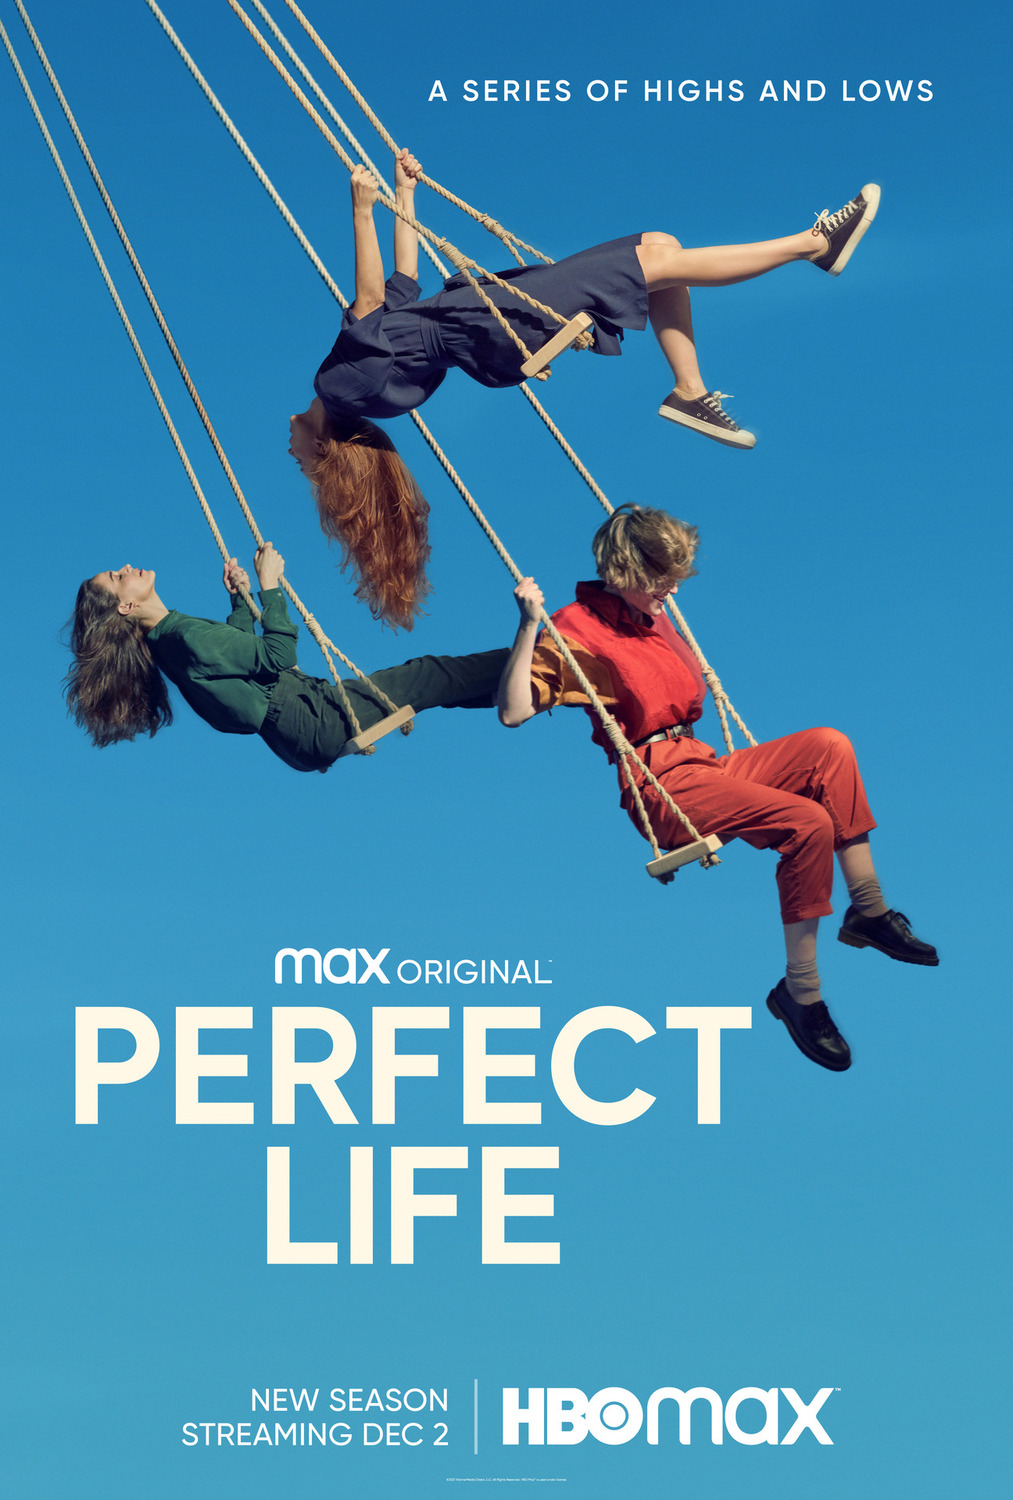 Extra Large Movie Poster Image for Vida perfecta (#4 of 4)